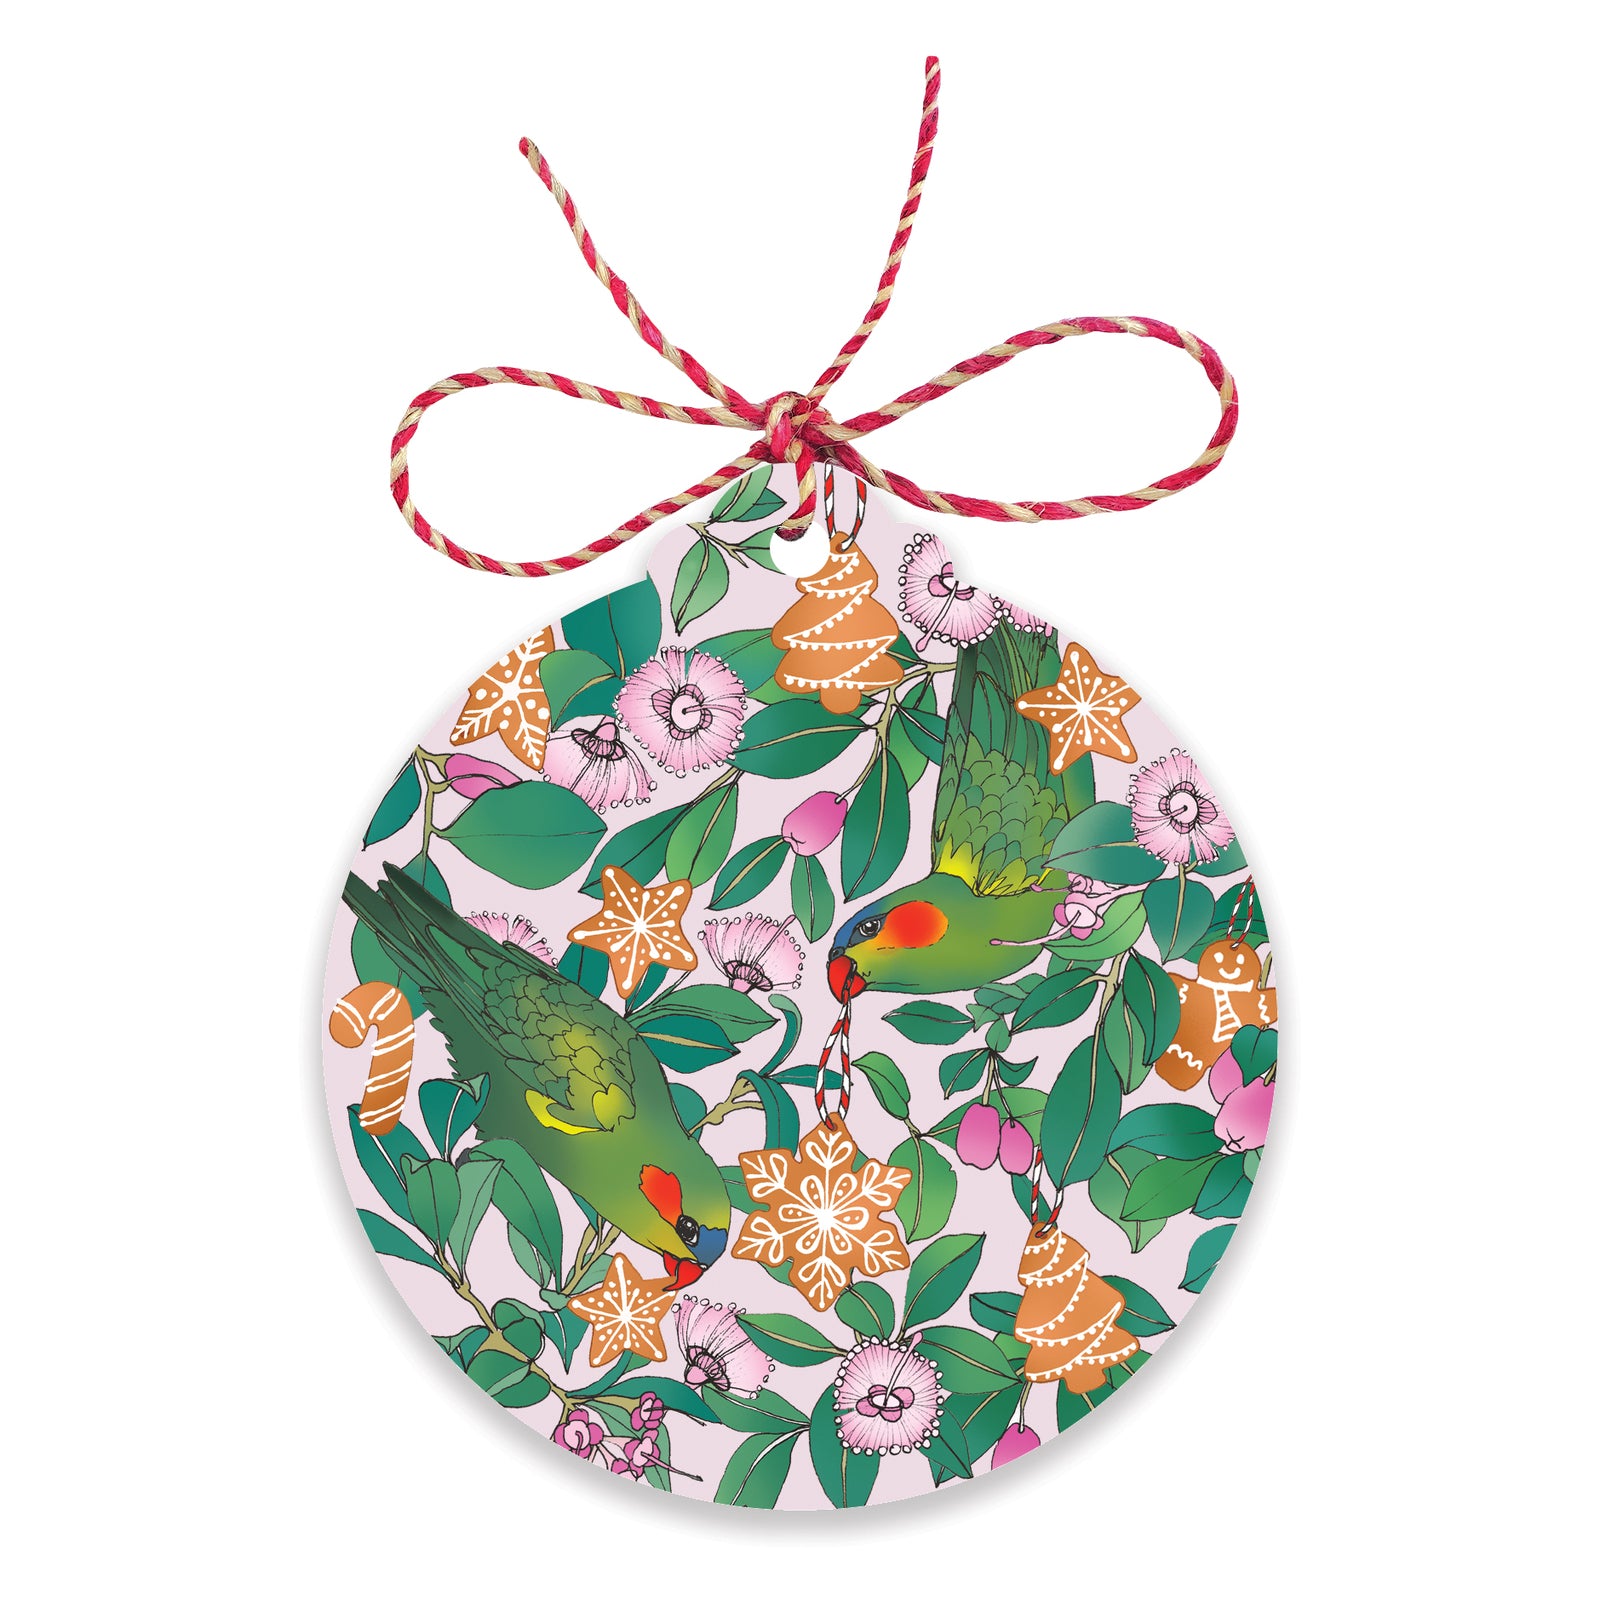 Christmas Gift Tags | Earth Greetings | LORIKEETS & LILLY PILLY